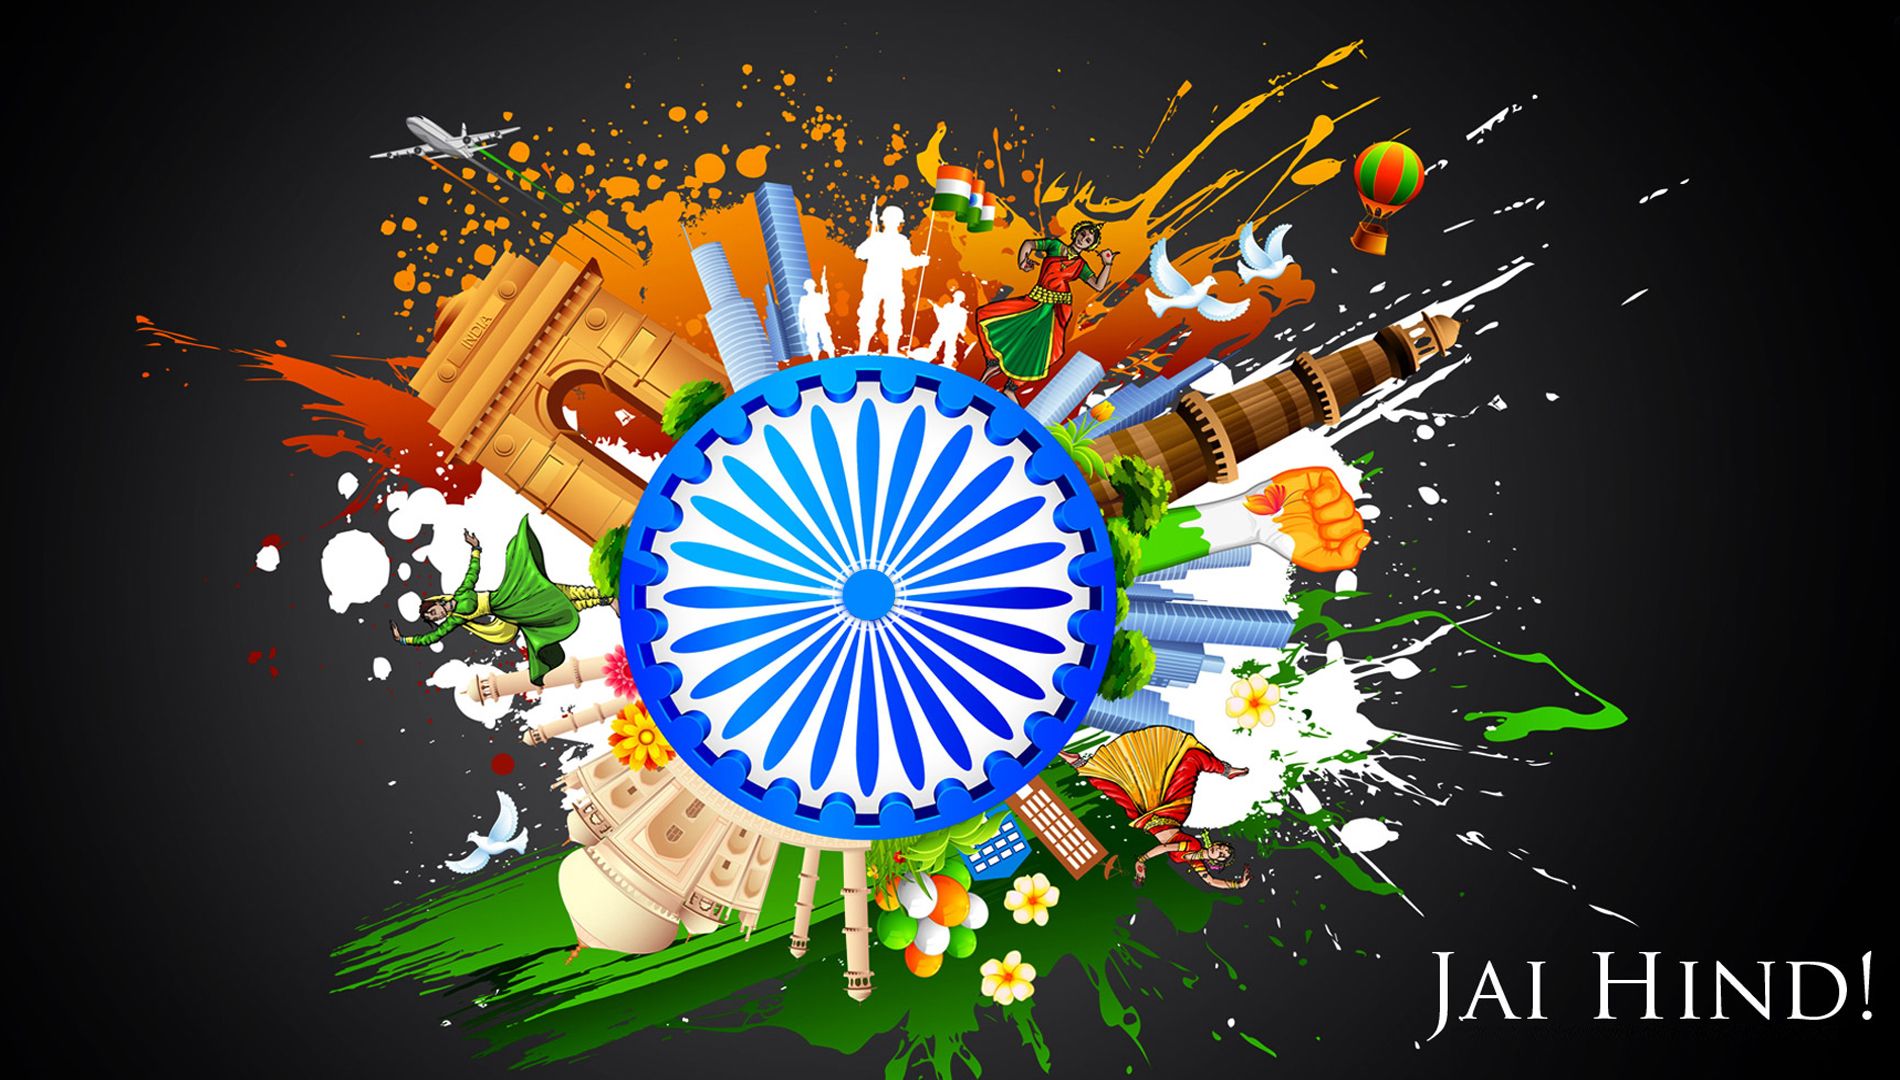 Free} Independence Day 2015 wishes-wallpapers Download | India